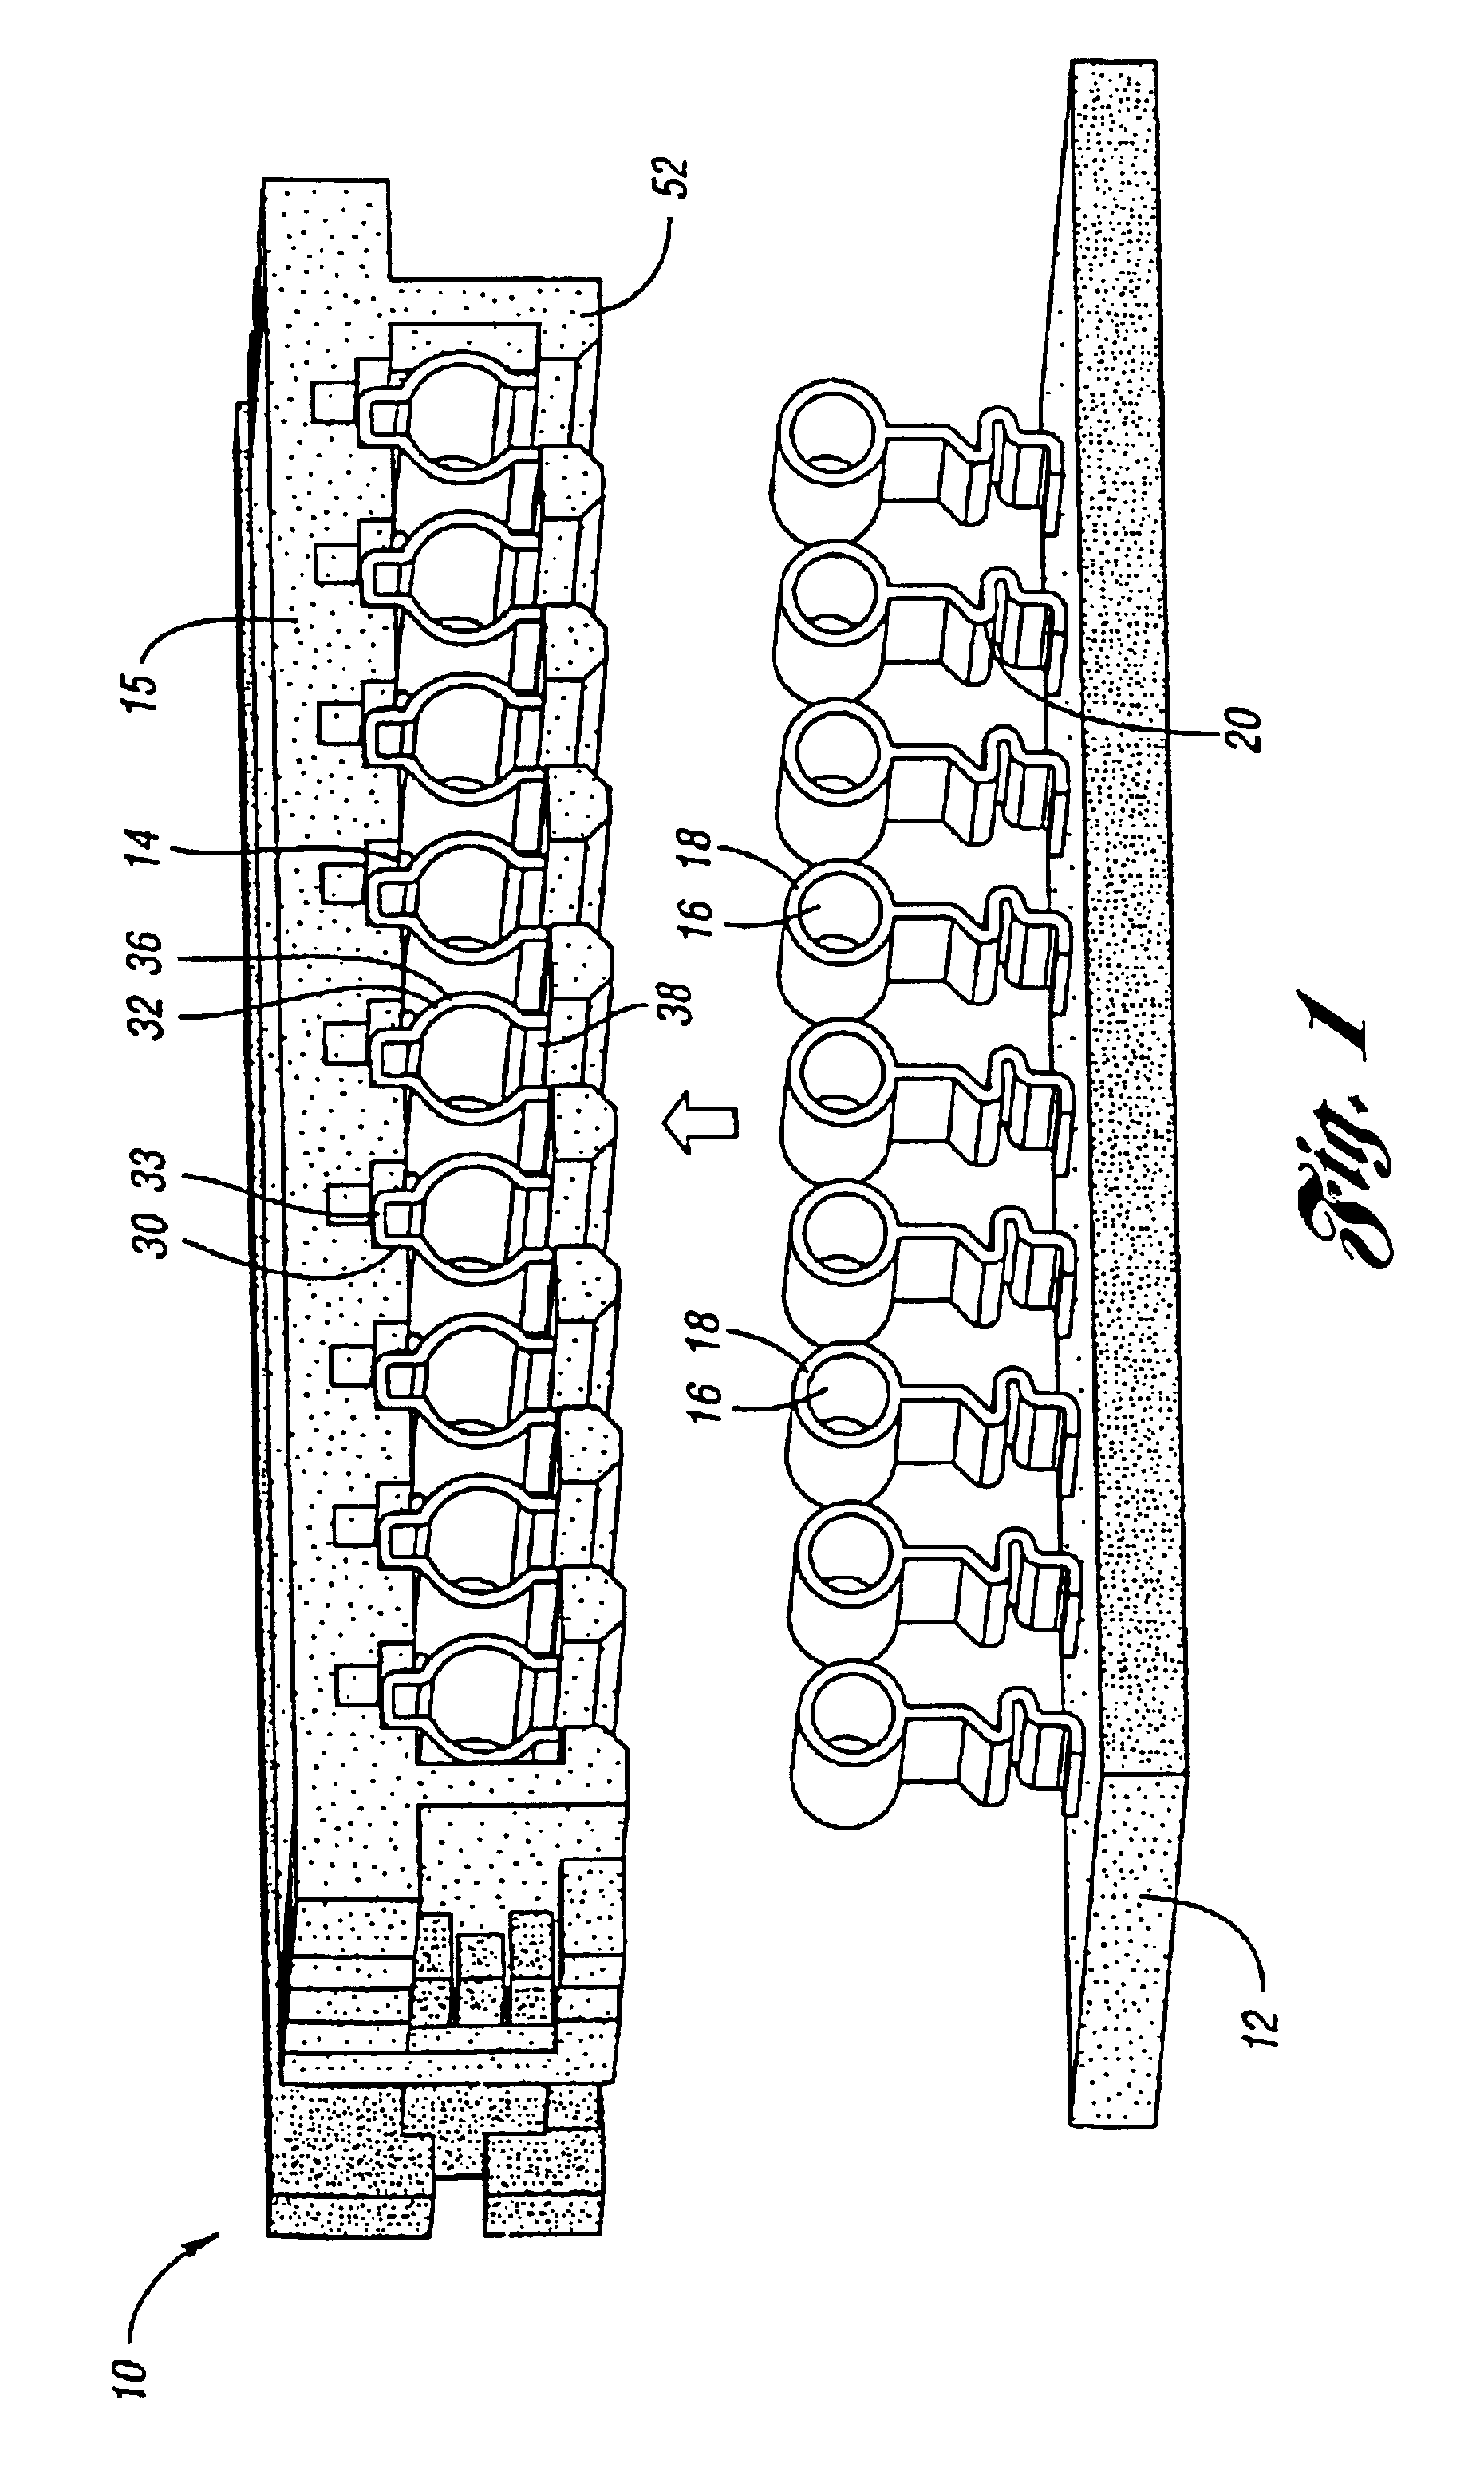 Connector assembly for electrical interconnection